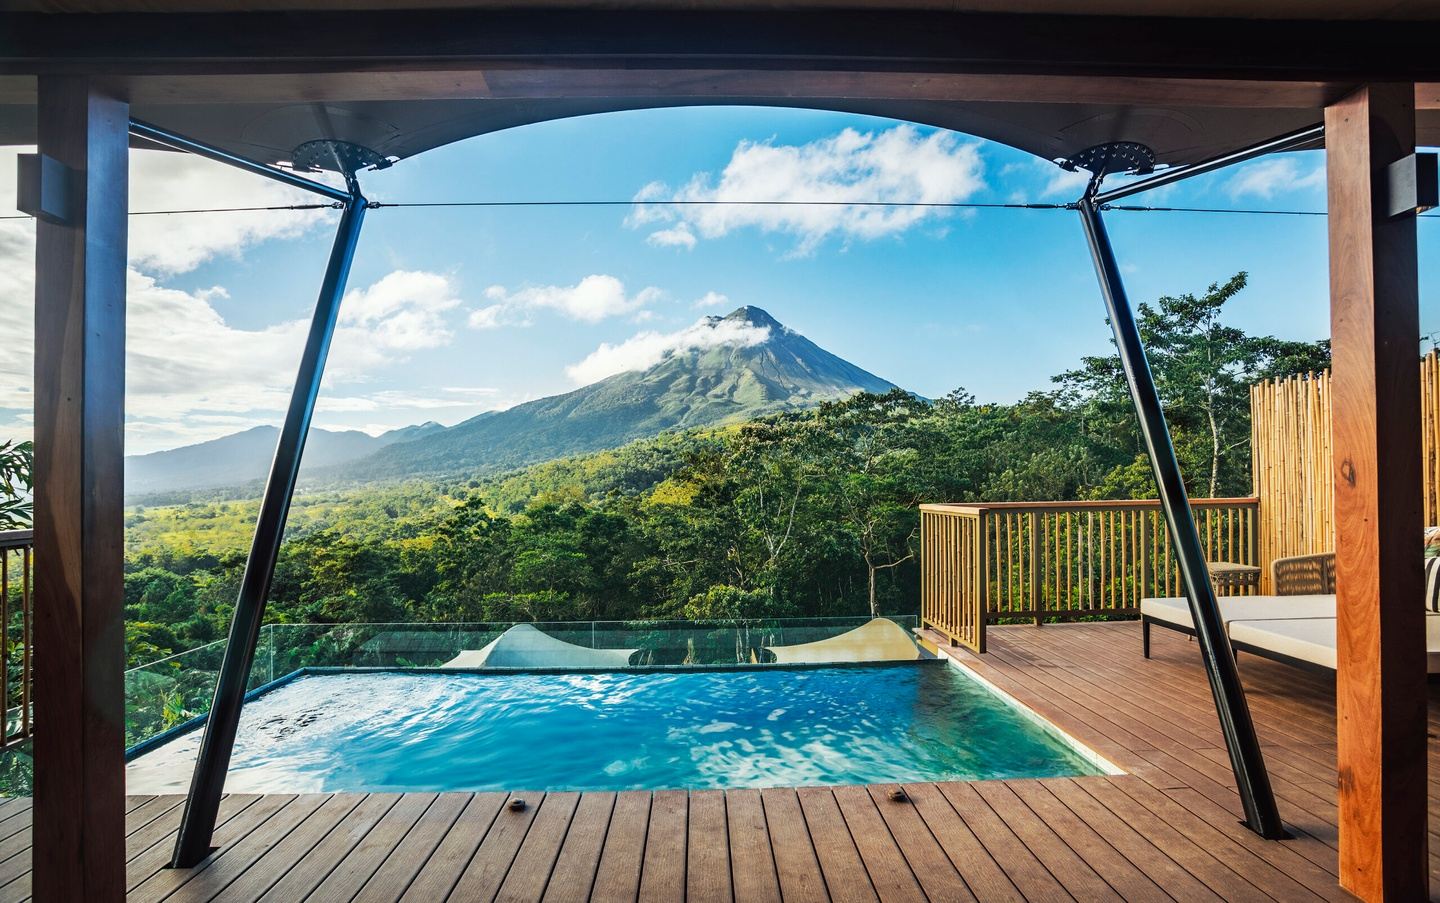 Experience the Journey of a lifetime together in Costa Rica